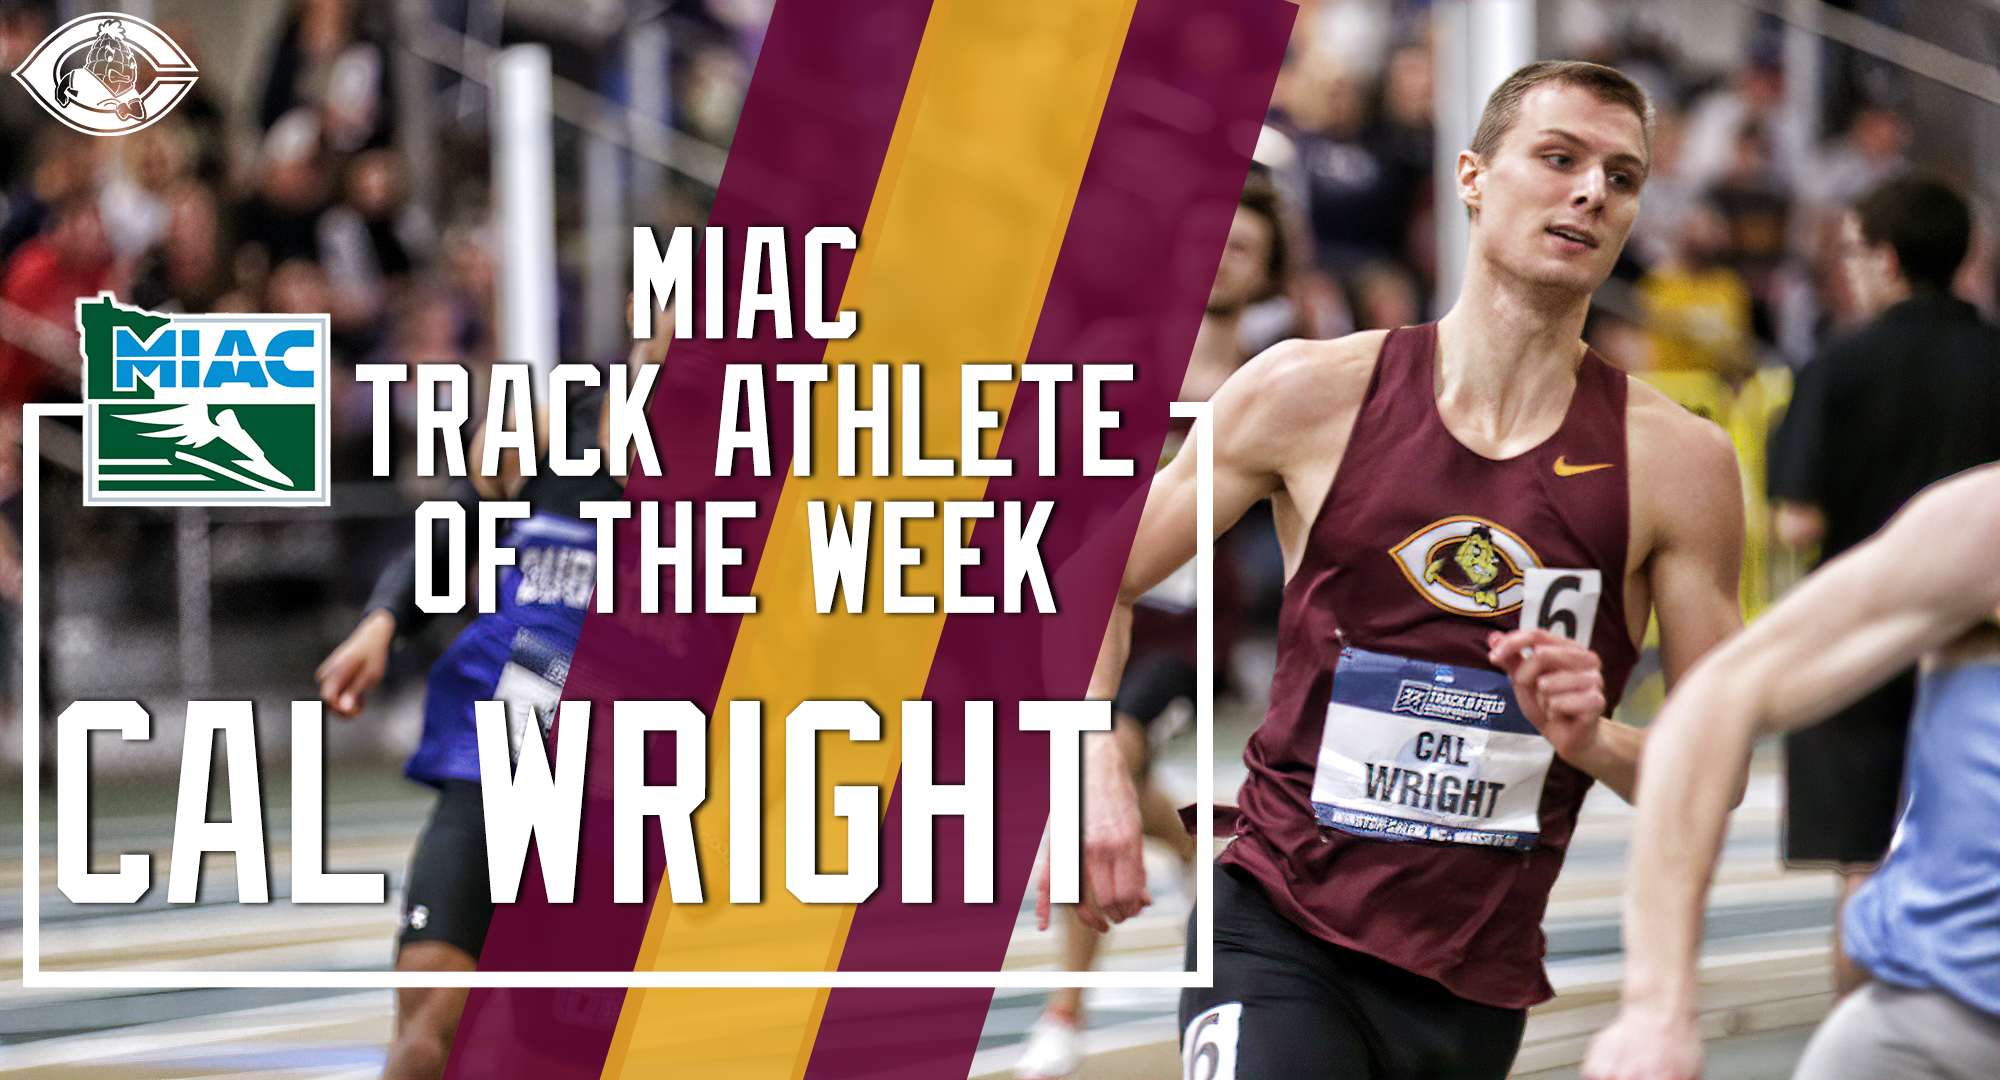 All-American Cal Wright was named the MIAC Men’s Track Athlete of the Week after breaking the 38-year-old school record in the 400 meters.